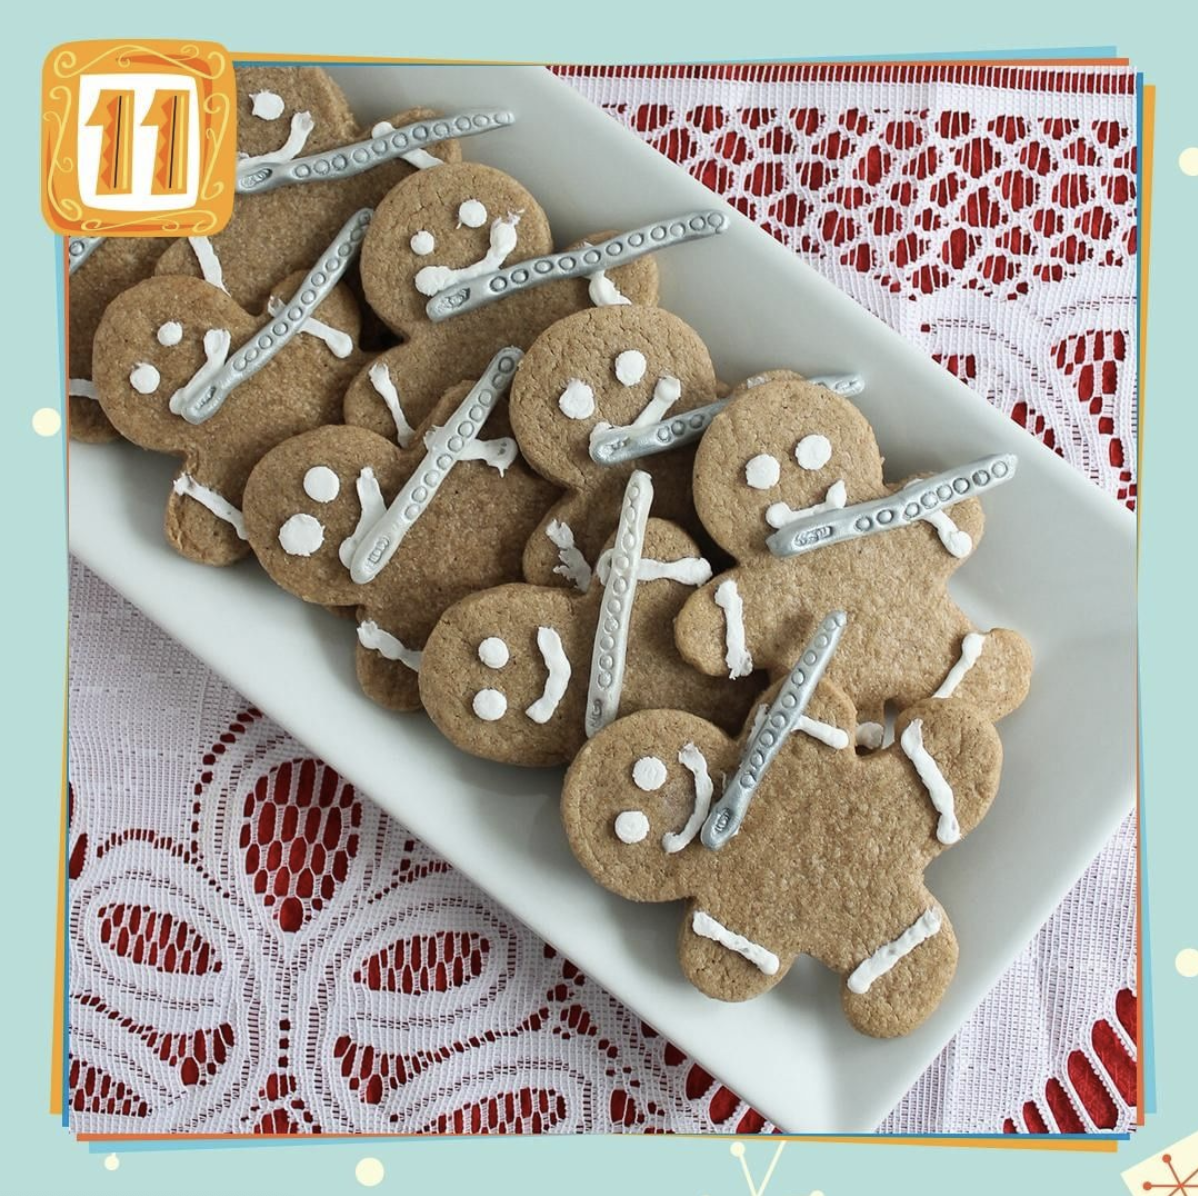 @countrychiccottage shared her take on pipers piping for the #ChristmasPriceIndex. Traditional pipers cost $2,804.40 this year, but you can make #DIY Piper Gingerbread Cookies in your own kitchen.